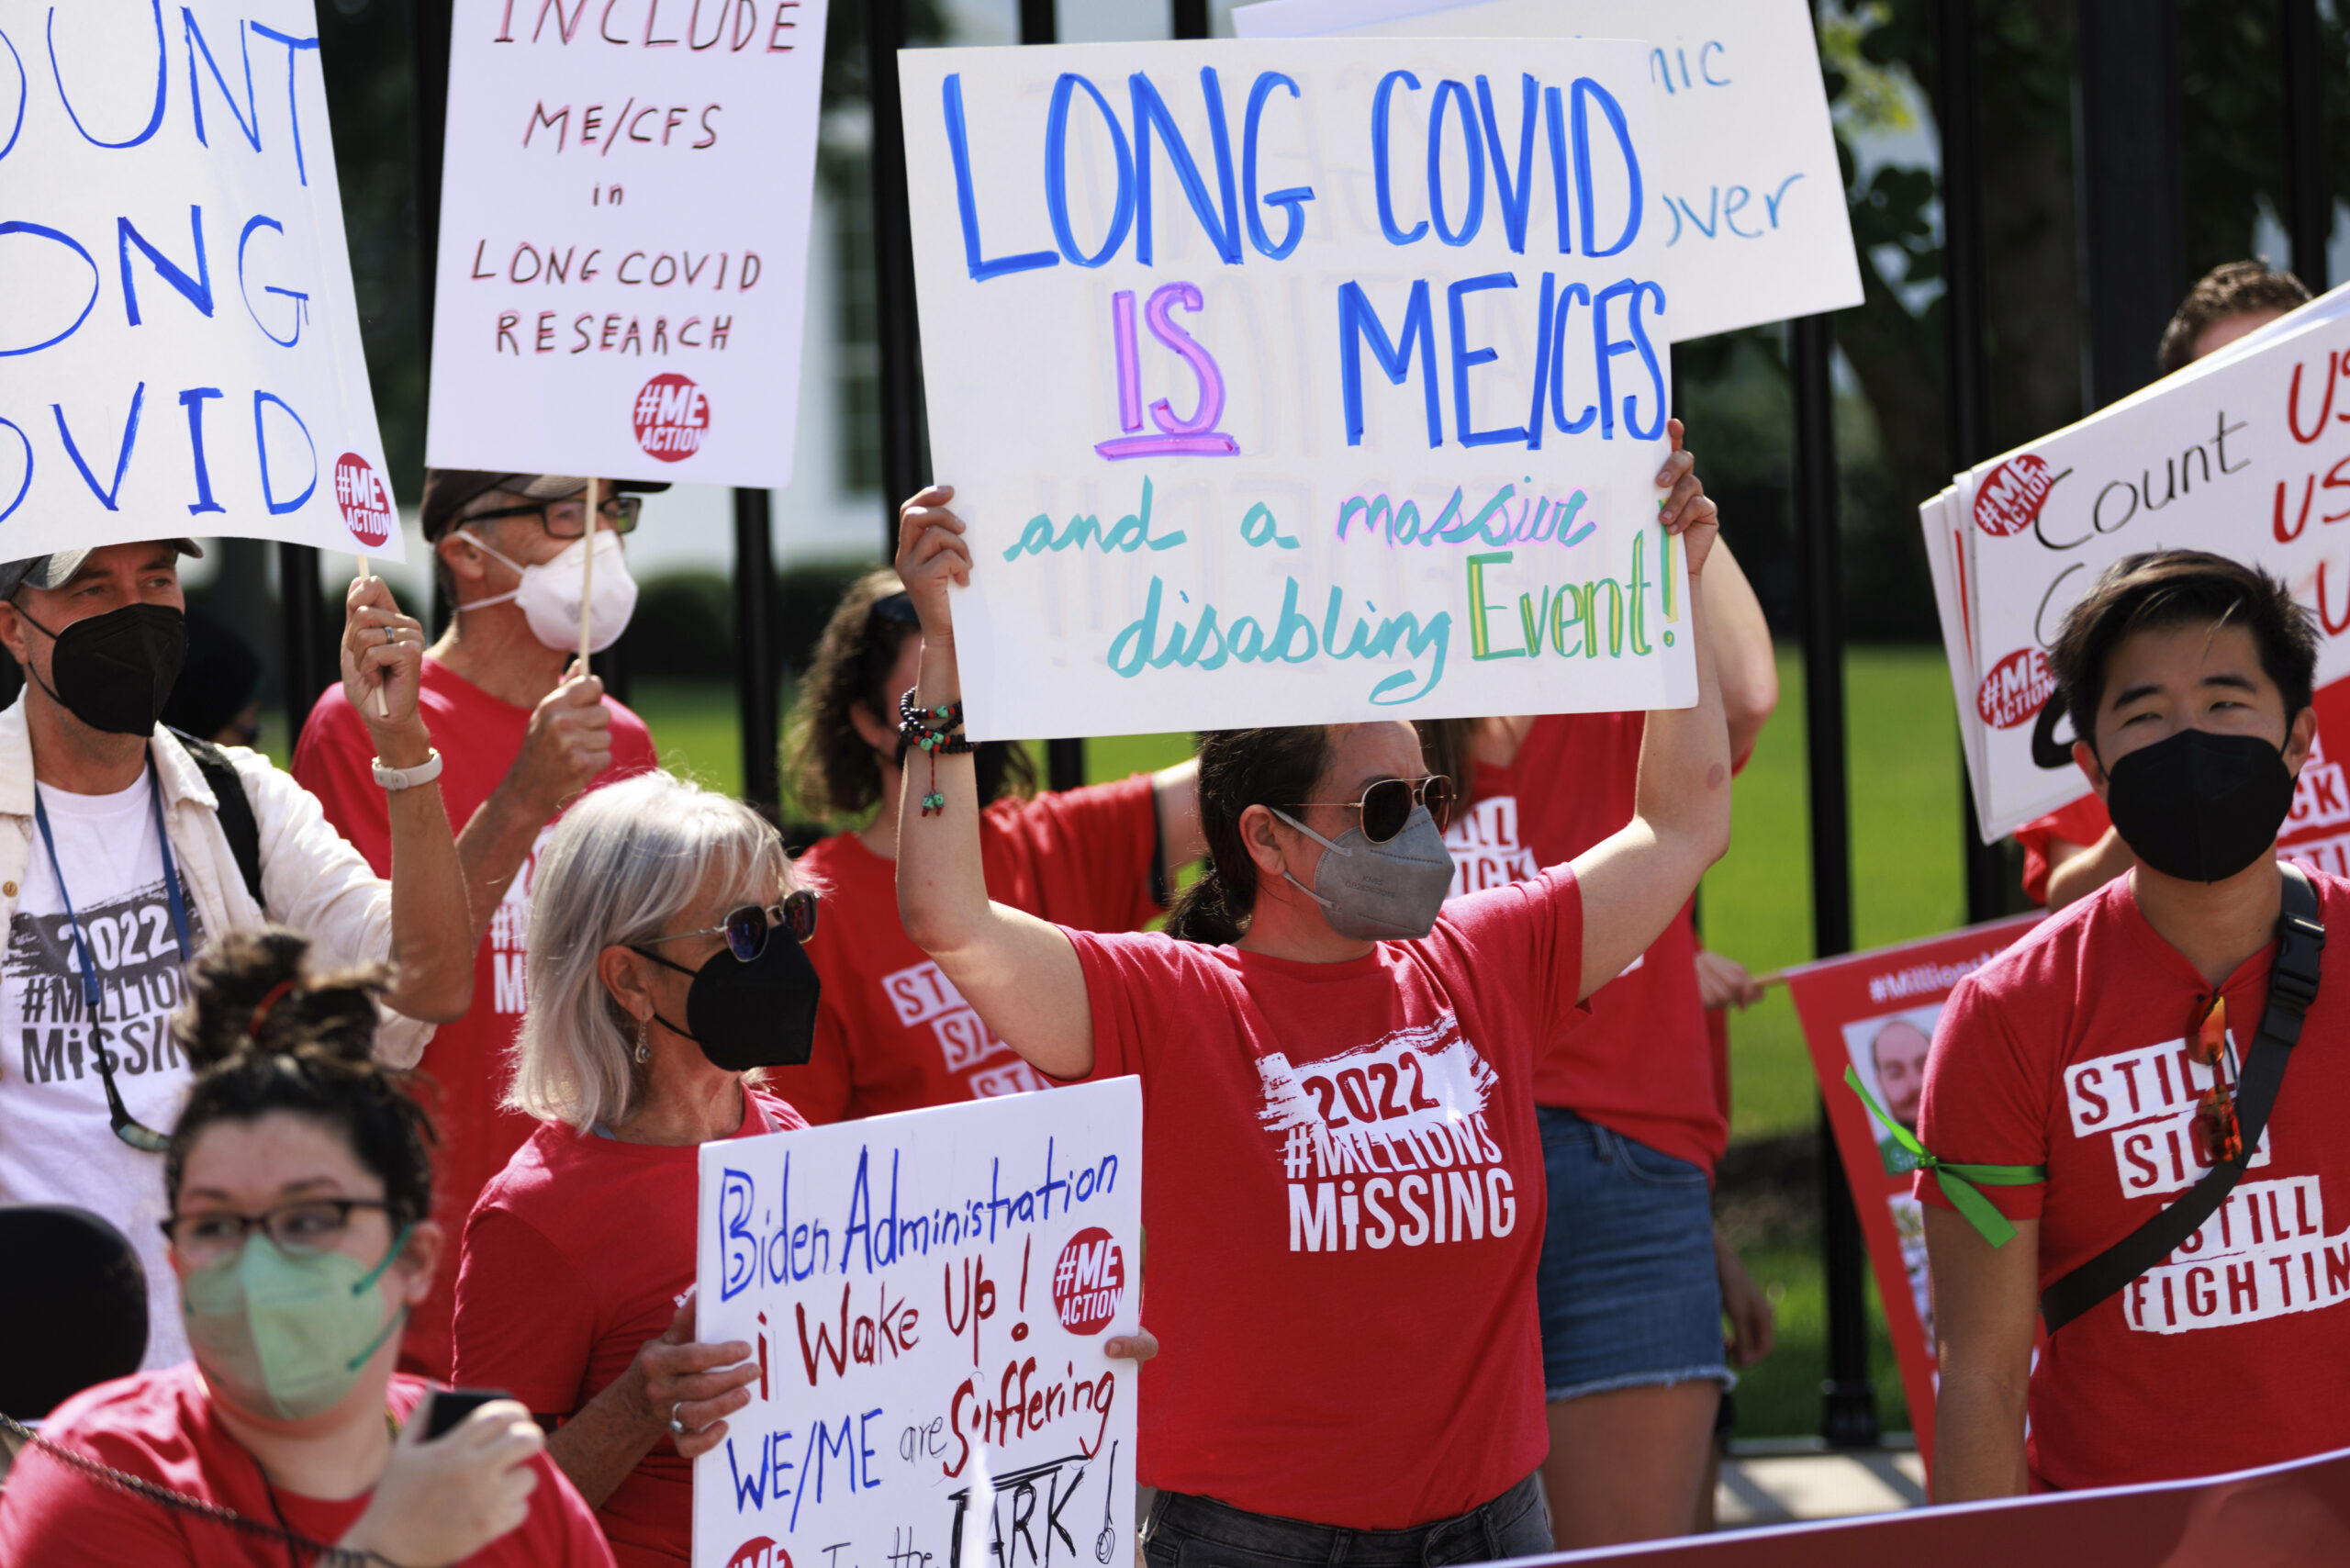 dozens of demonstrators donning red t-shirts hold protest signs saying LONG COVID IS ME/CFS and COUNT LONG COVID outside the White House gates